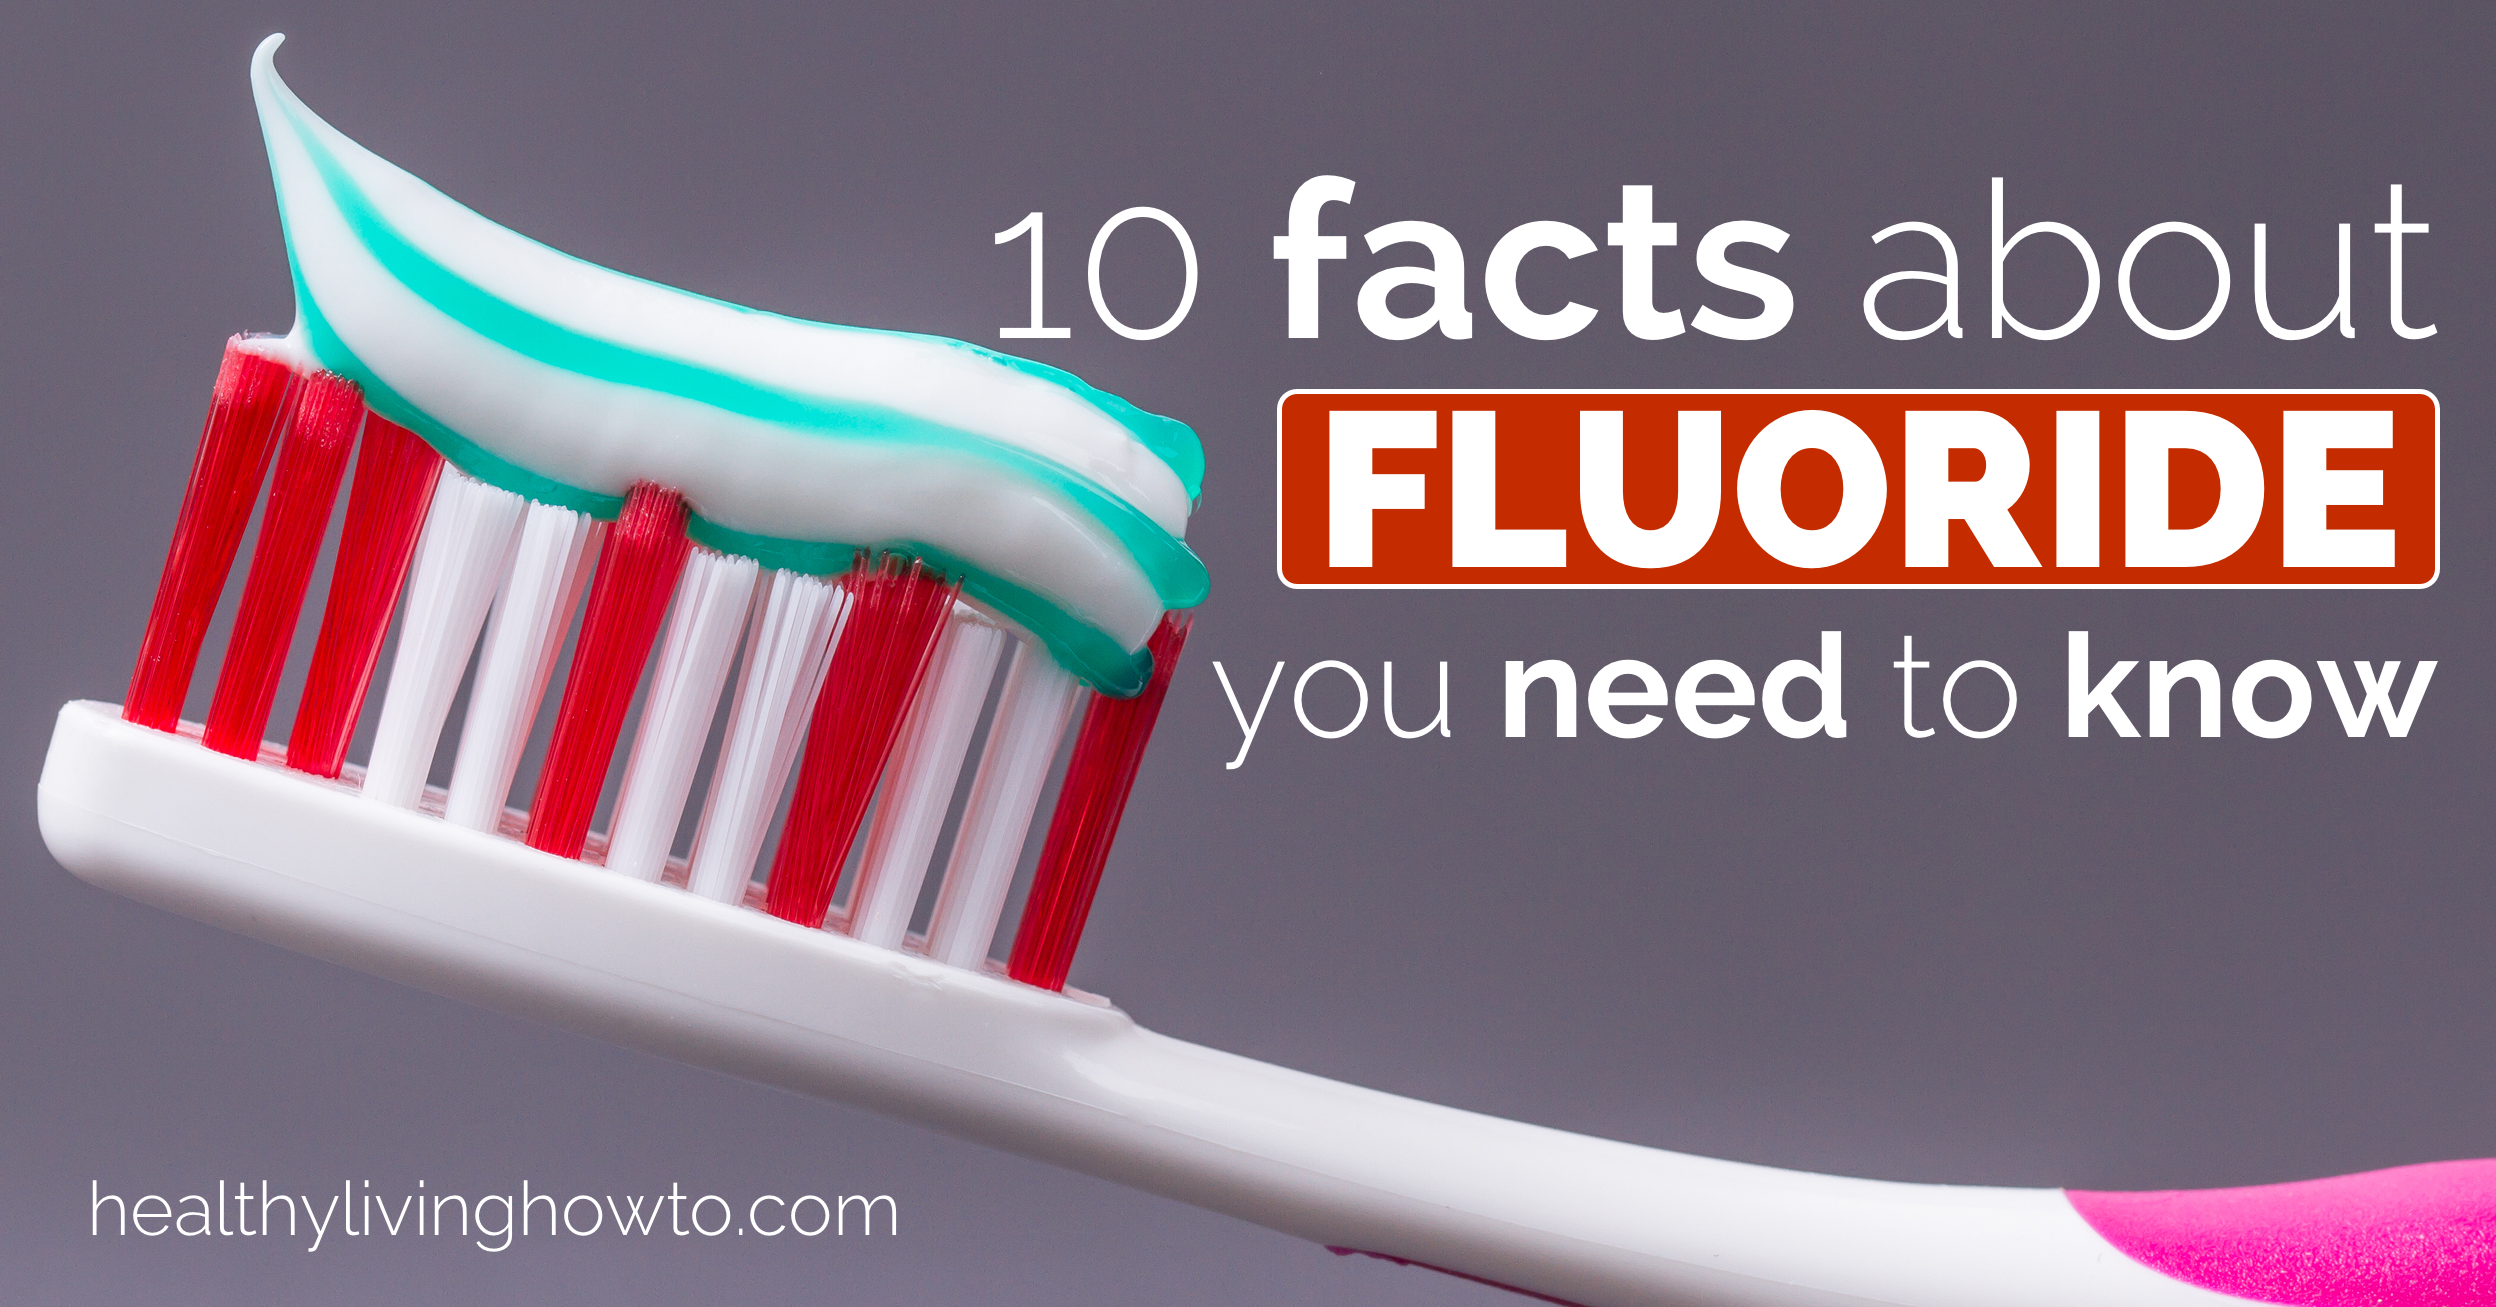 10 Facts About Fluoride You Need To Know | healthylivinghowto.com